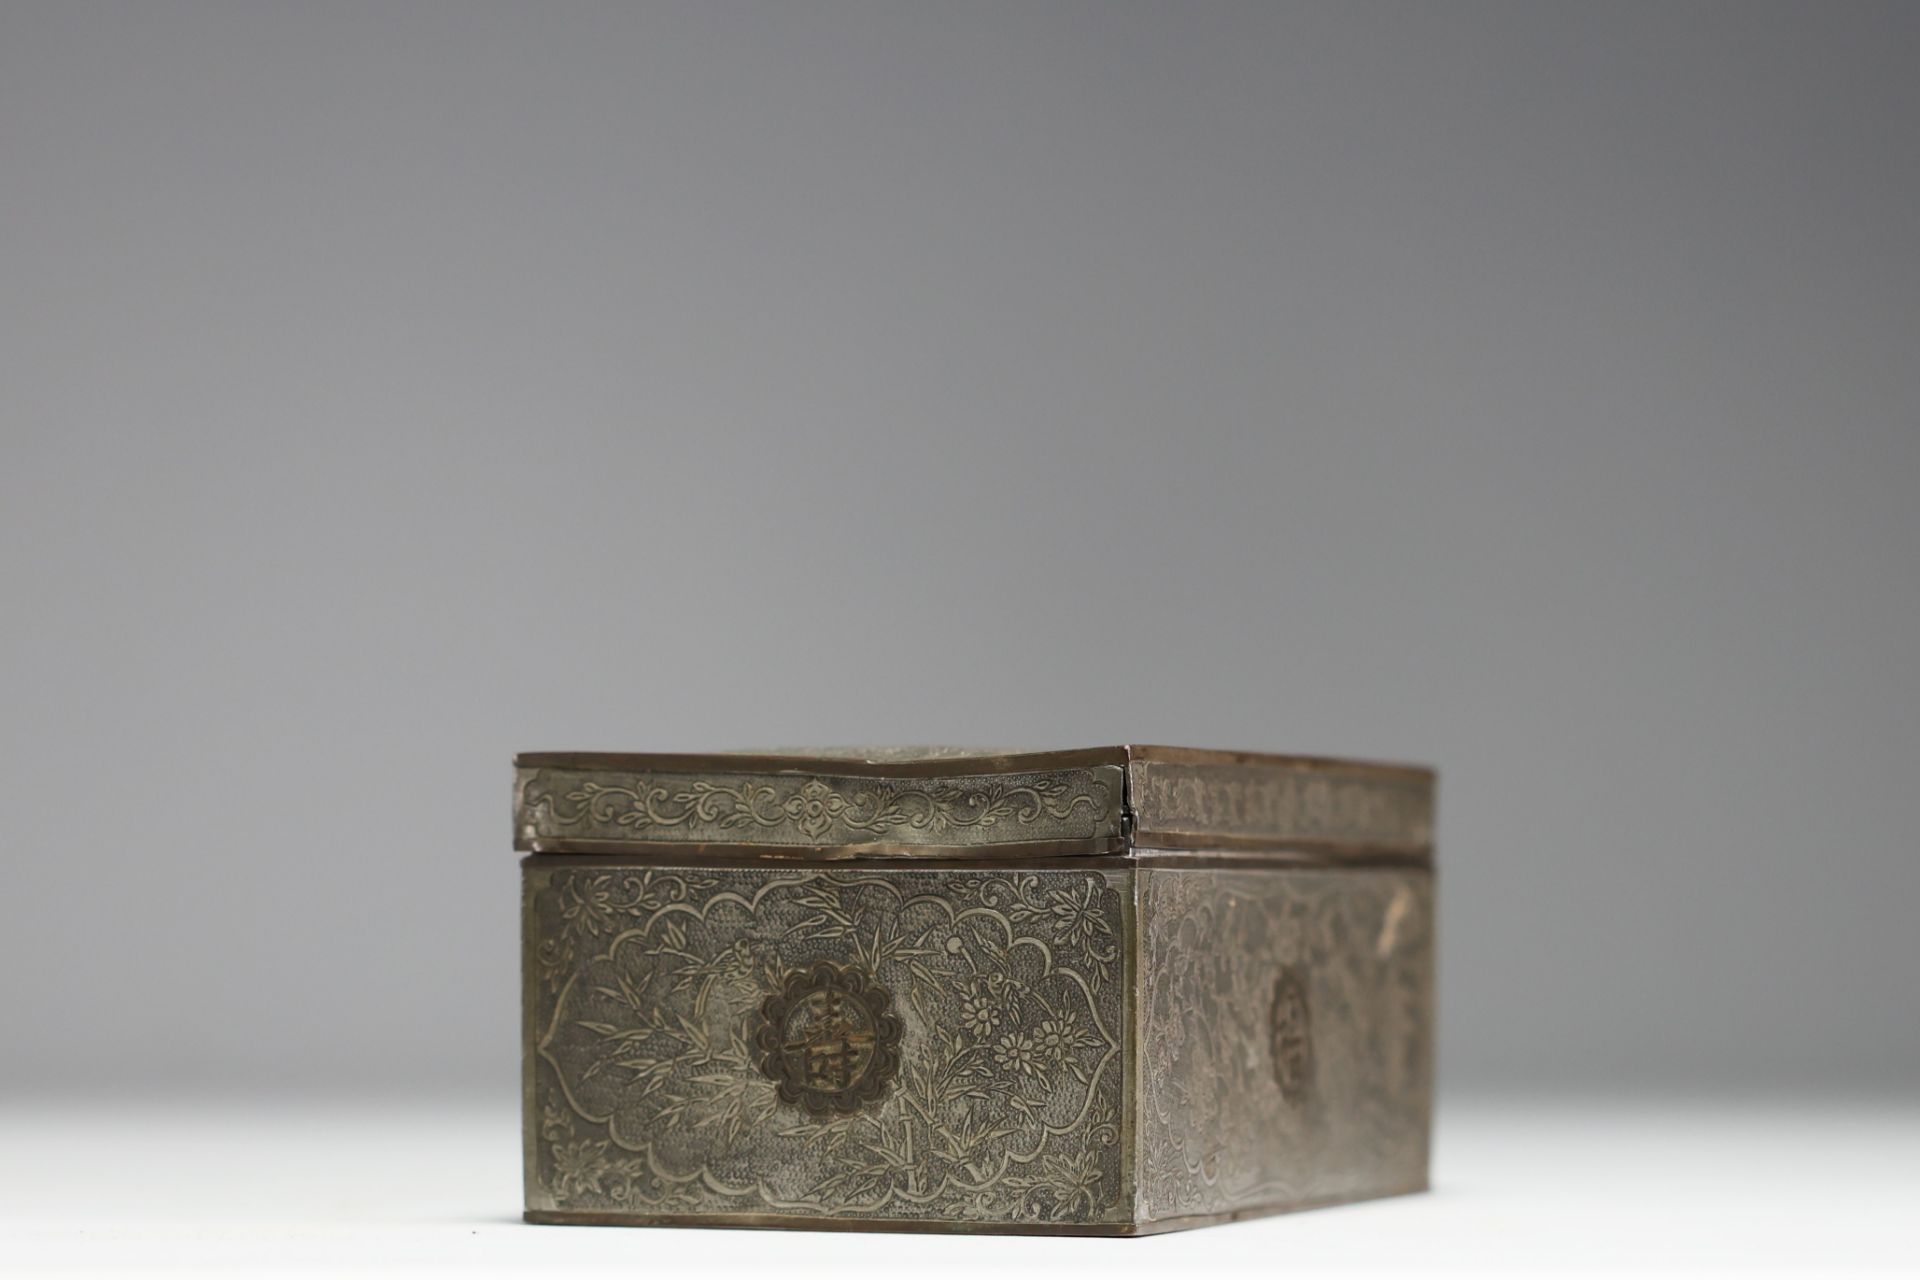 China - Pewter and copper tobacco drying case with dragon decoration, late 19th century. - Bild 2 aus 4